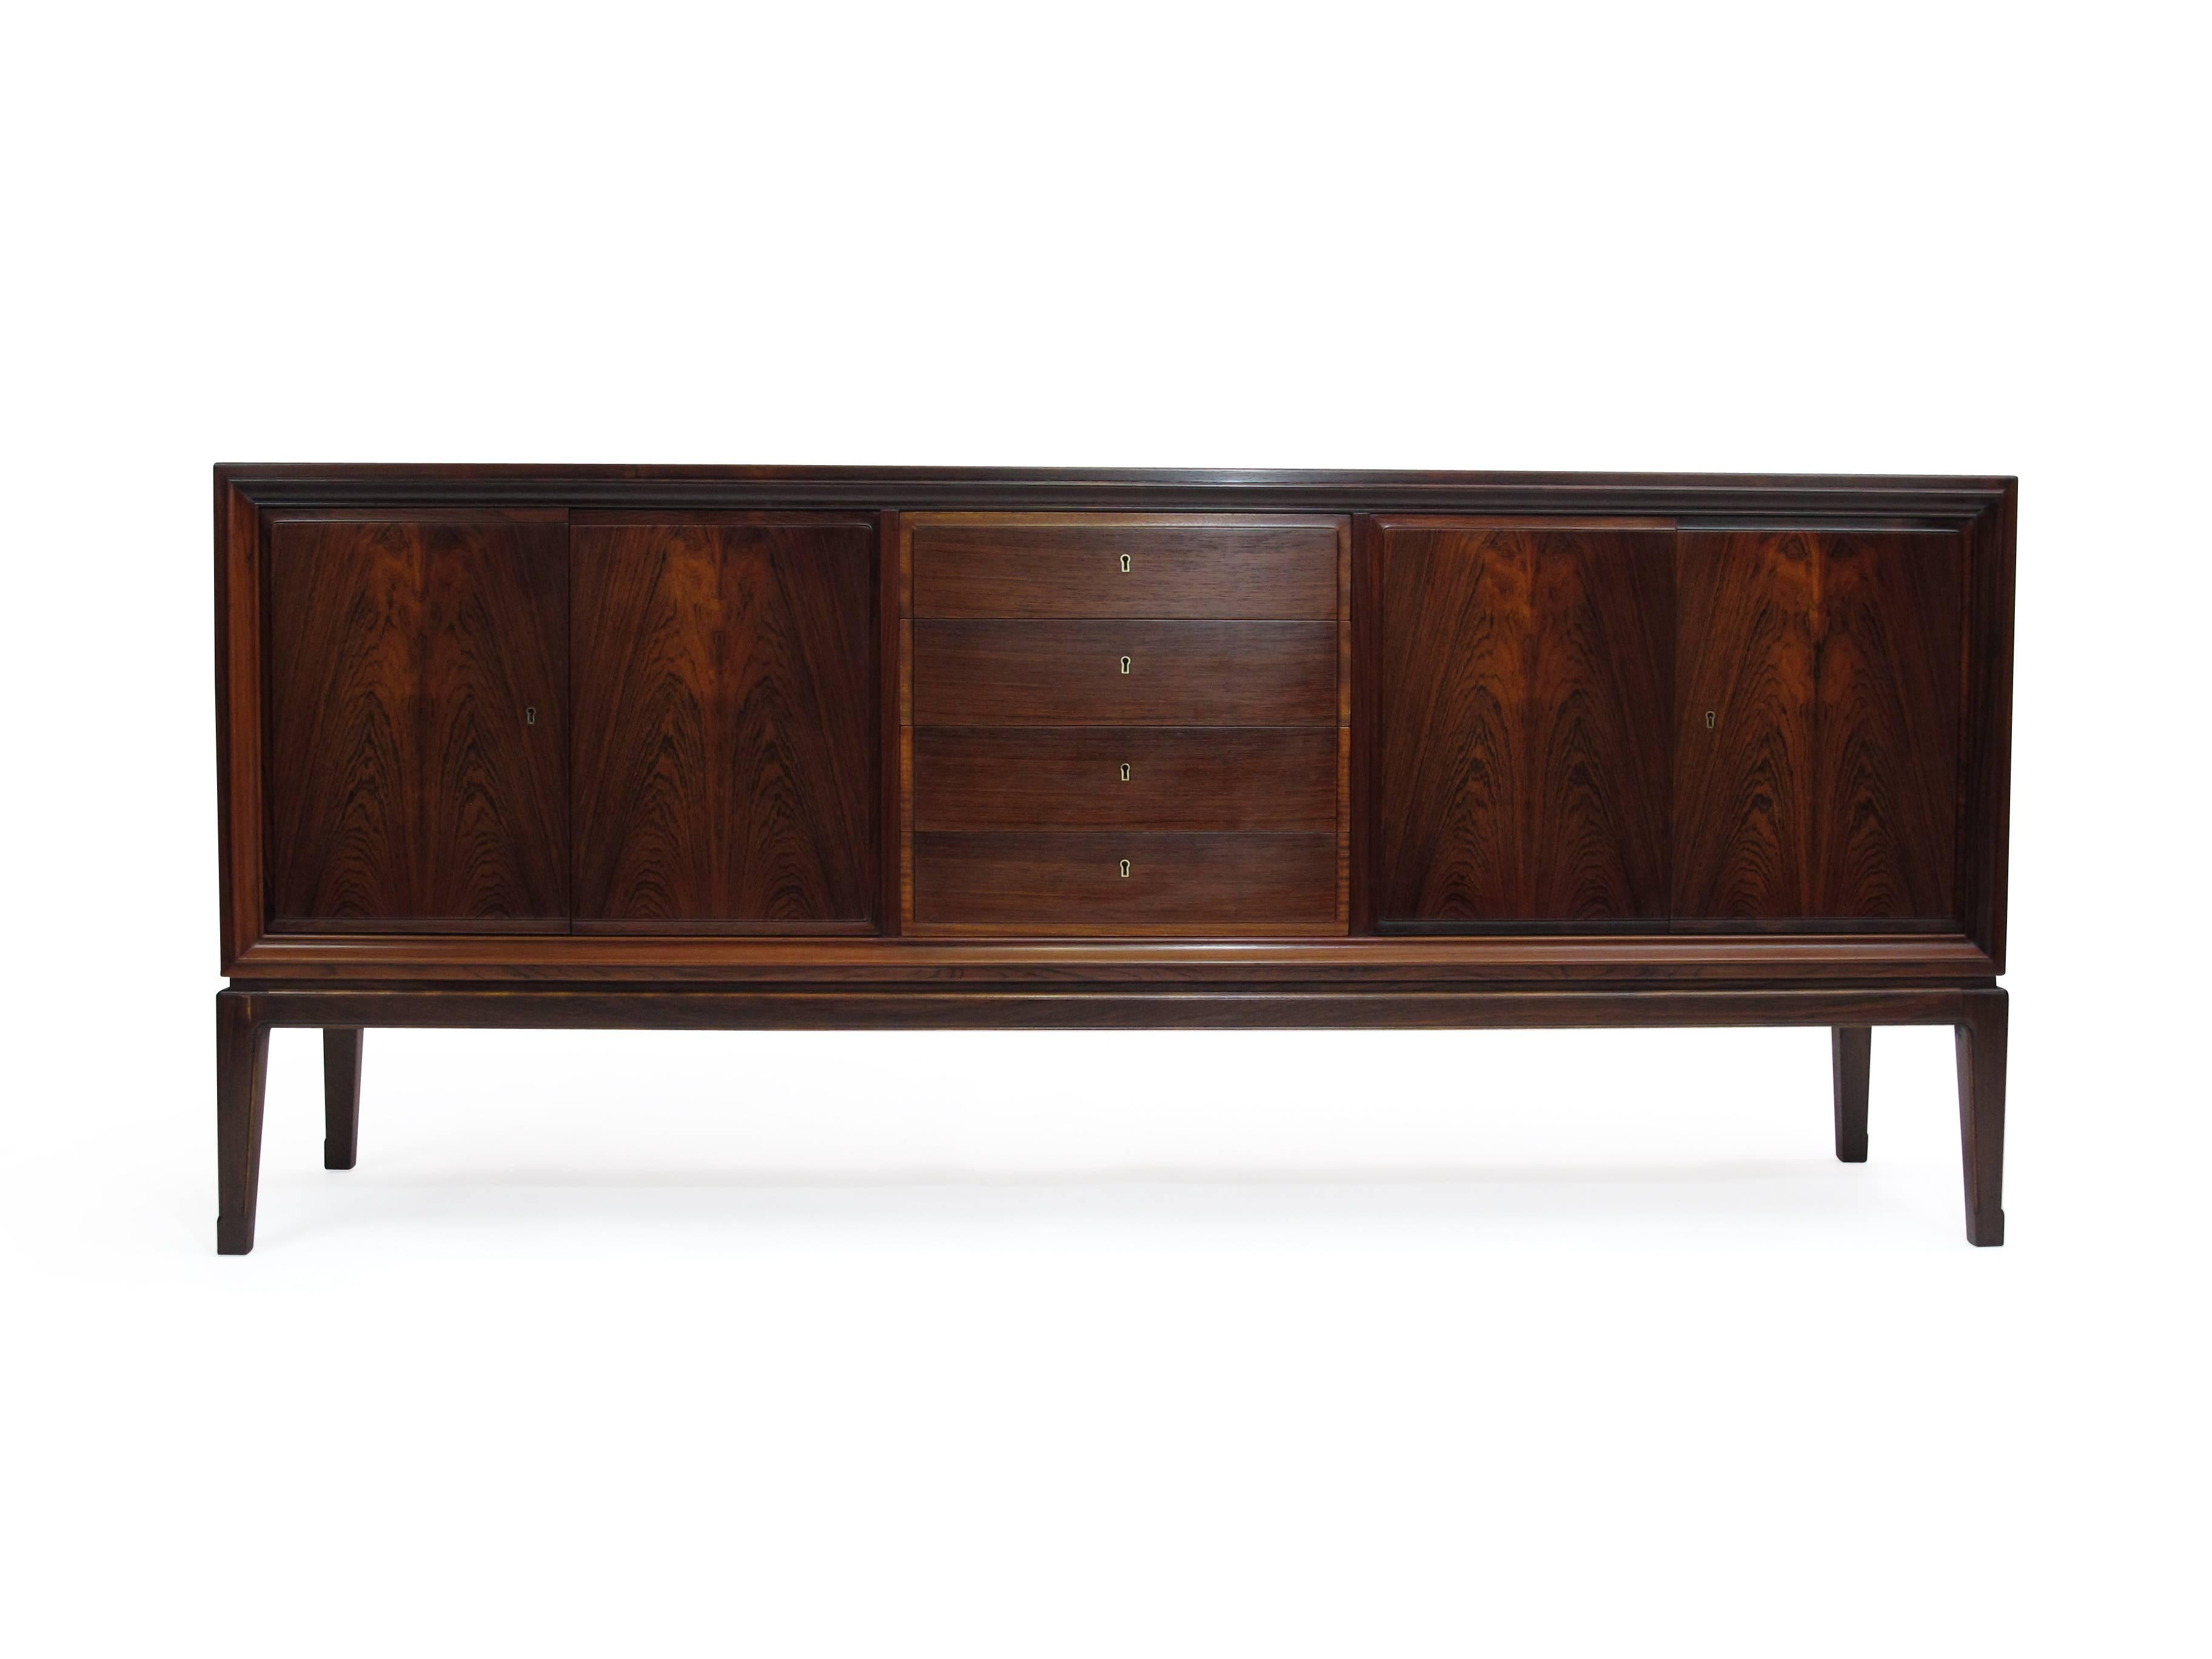 Finely crafted credenza of dark rosewood with pattern match across front of doors. Fully locking doors and centre drawers. The double doors open to reveal a birch interior with an adjustable shelf. Raised on tapered legs.